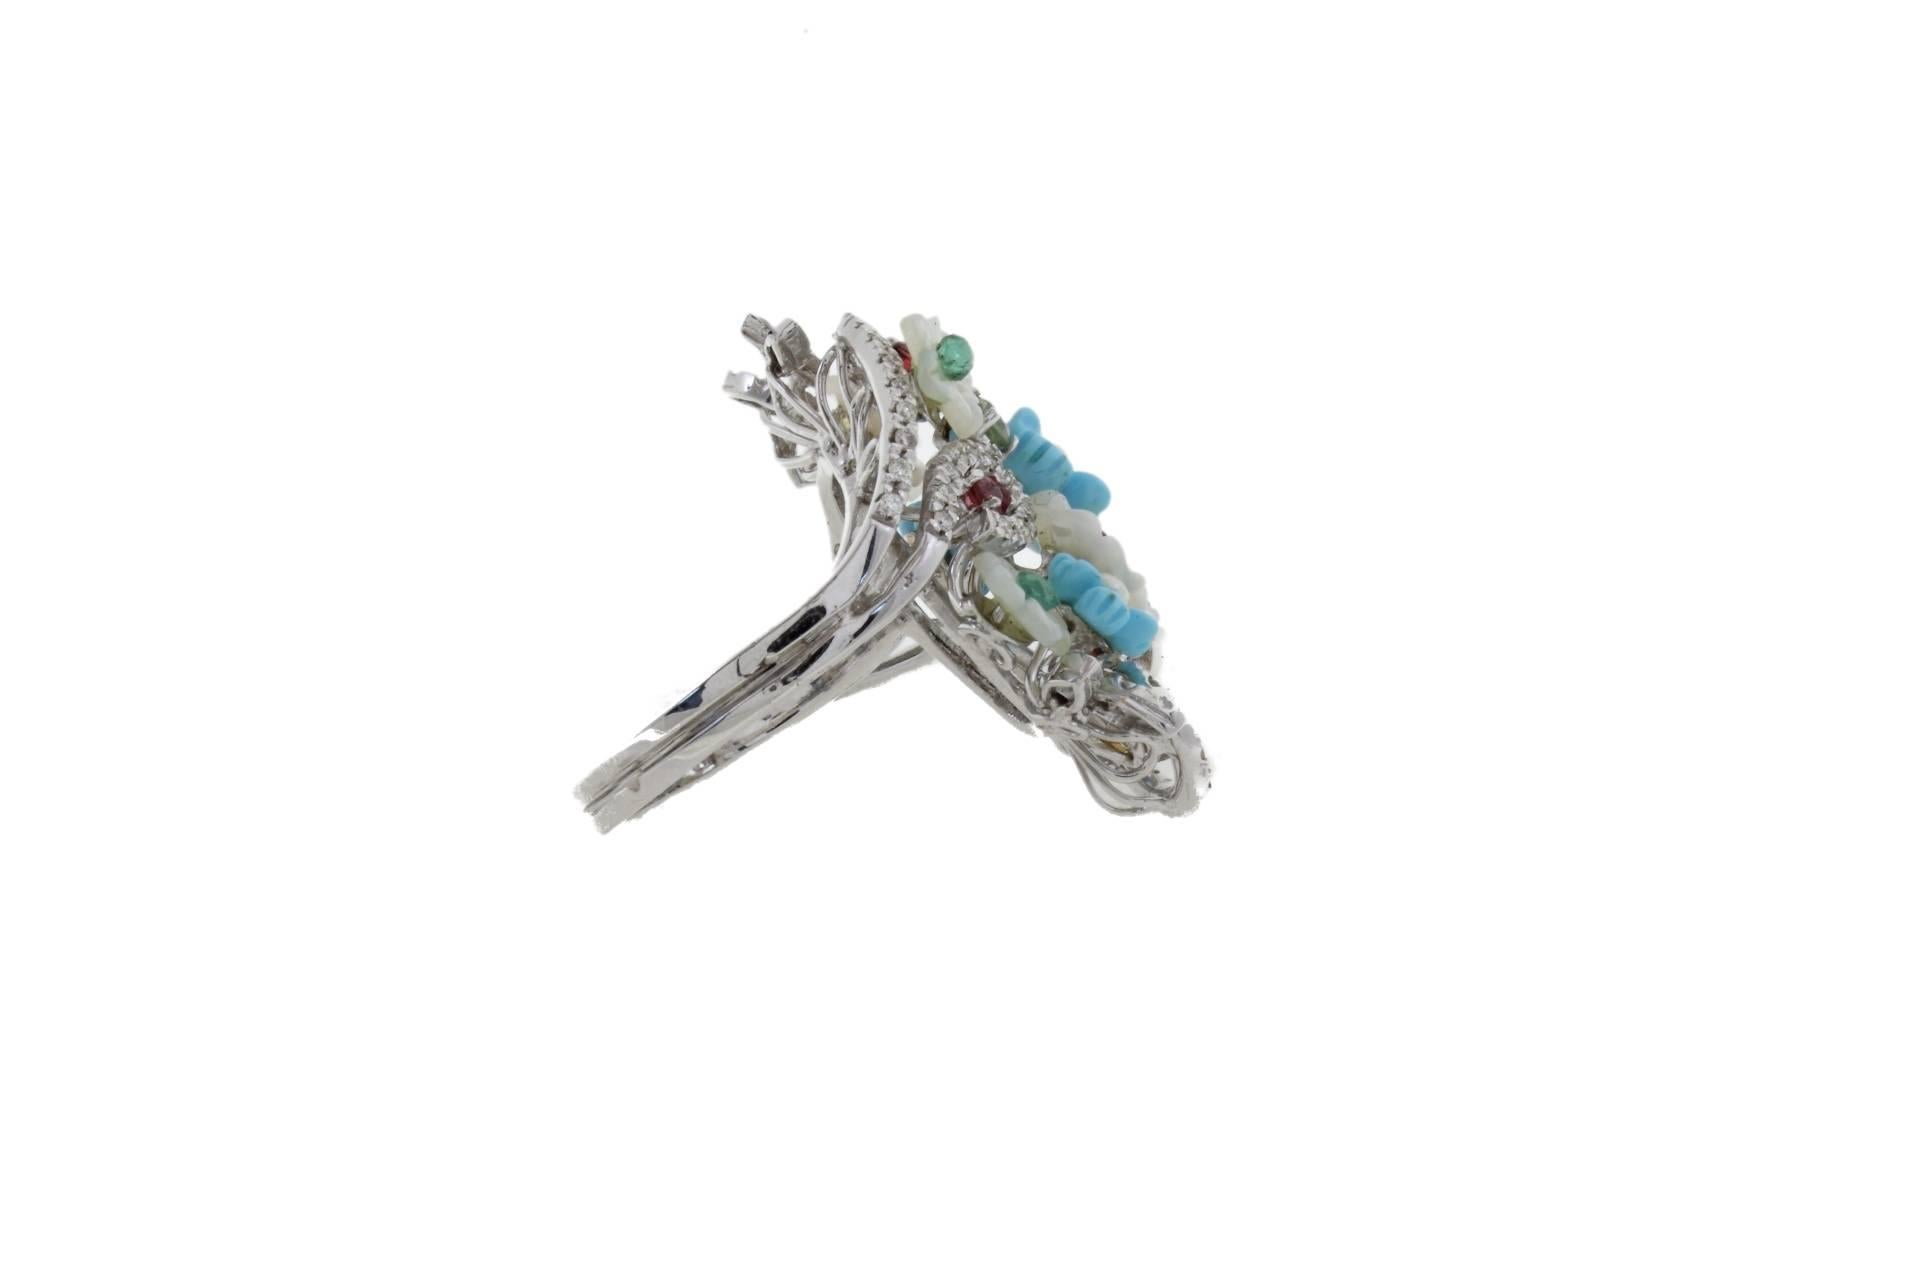 Cocktail ring in 14k white gold composed of flower shaped mother-of-pearls, flower shaped turquoises, pearls, emeralds, rubies and yellow sapphire all around.

Diamonds 0.69 kt
Emeralds, Rubies, Sapphire 0.97 kt
Pearls 0.10 gr
Turquoise,